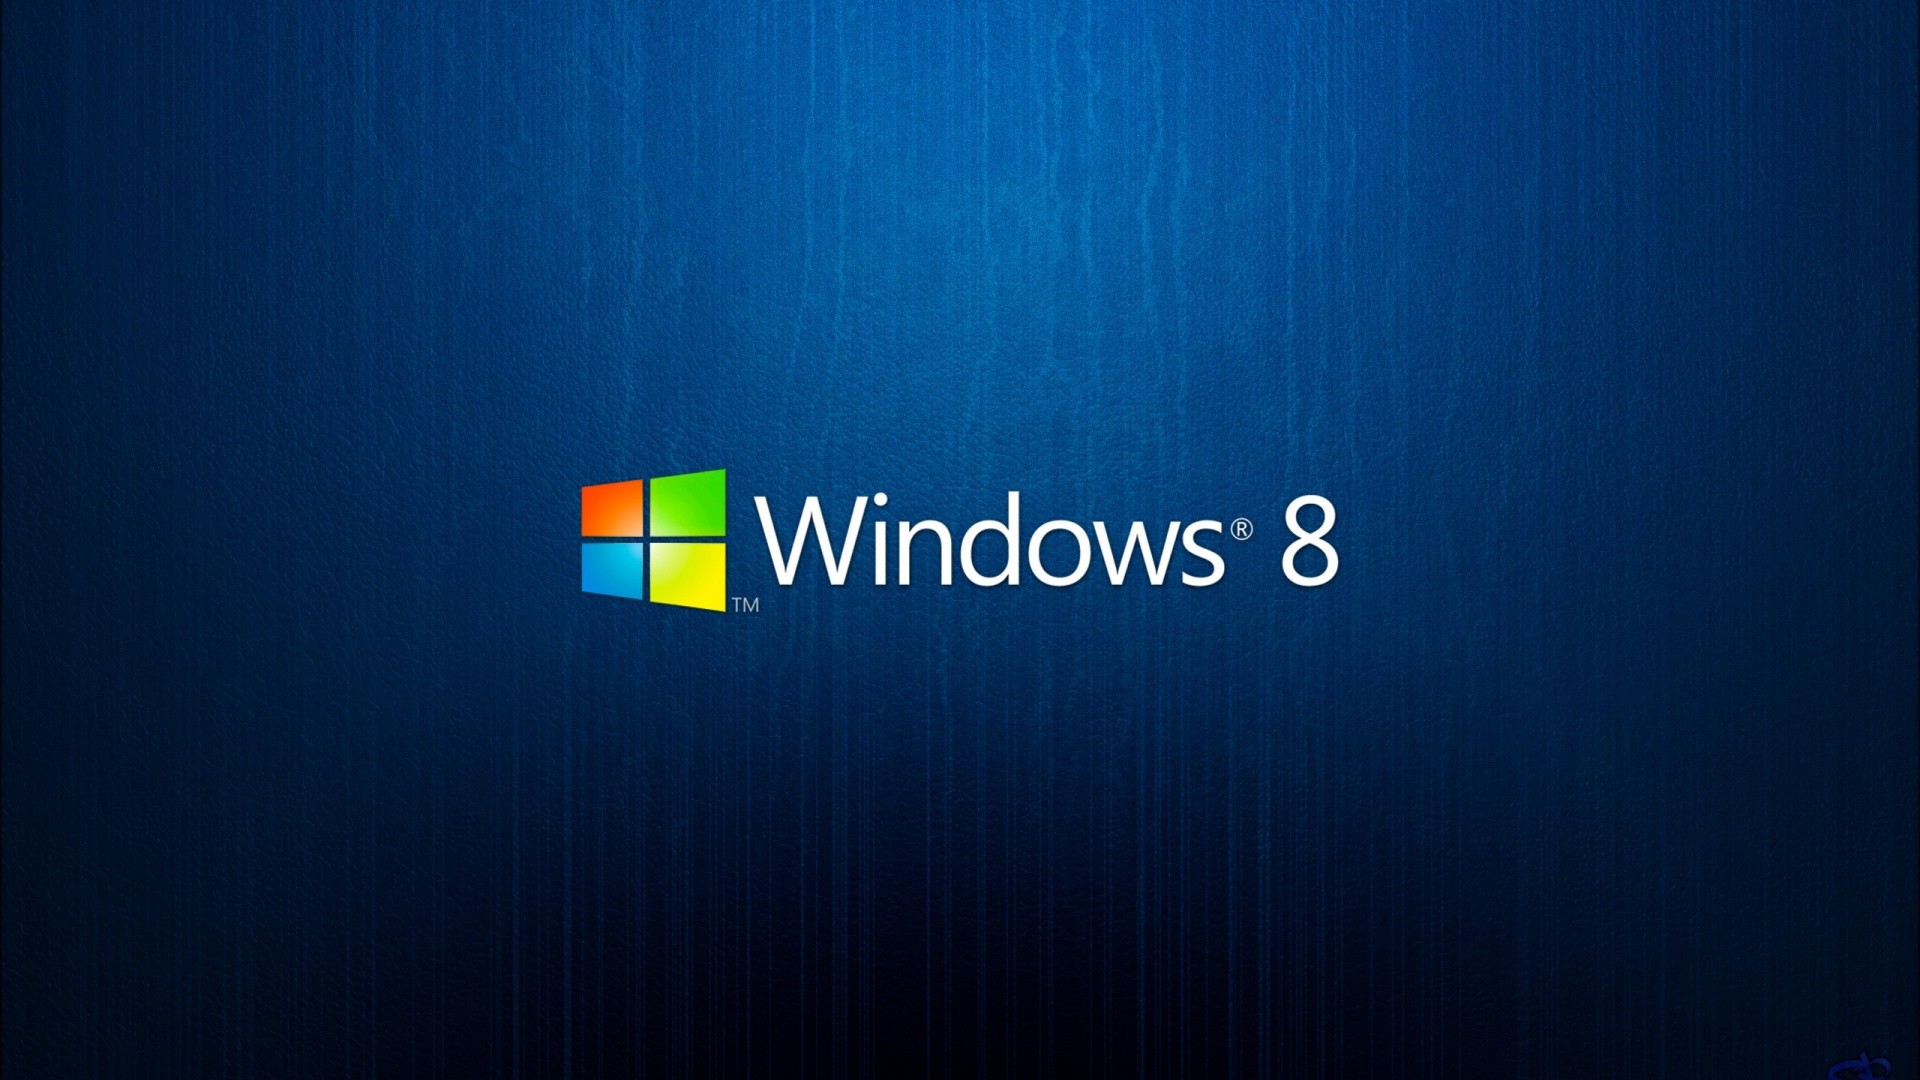 1920x1080 Windows 8 Background HD Wide Wallpaper for Widescreen (51 Wallpapers)